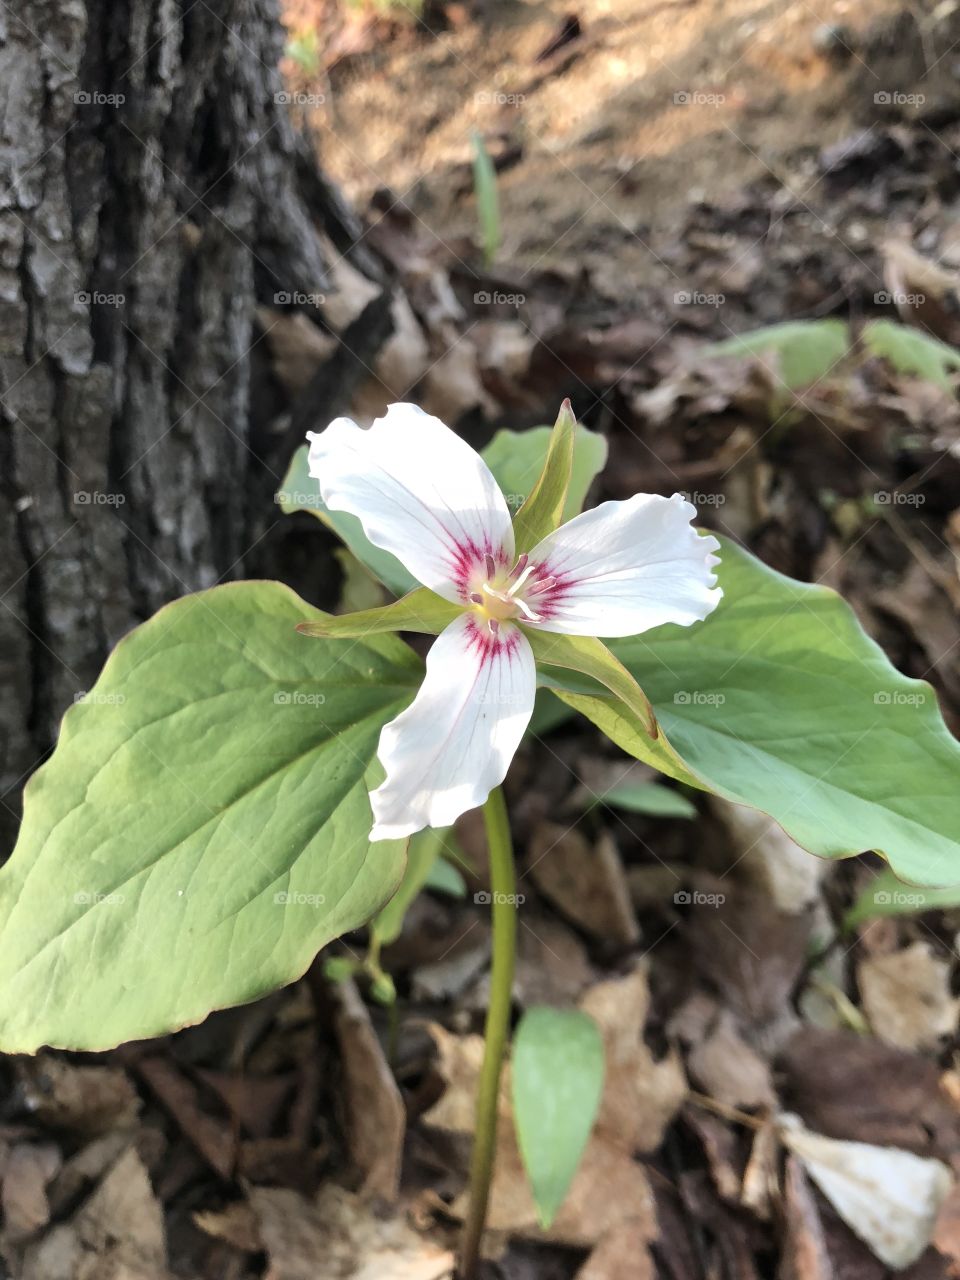 trillium- mix of red and white